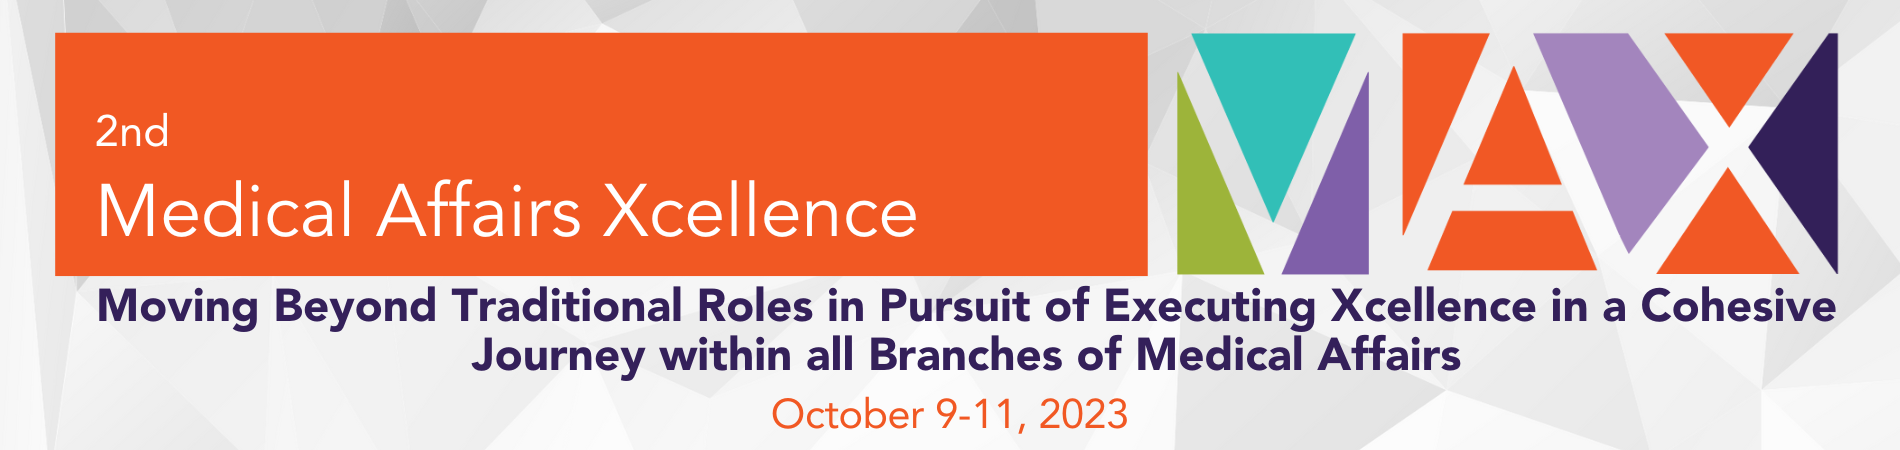 2nd Medical Affairs Xcellence, Moving Beyond Traditional Roles in Pursuit of Executing Xcellence in a Cohesive Journey within all Branches of Medical Affairs, October 9-11, 2023